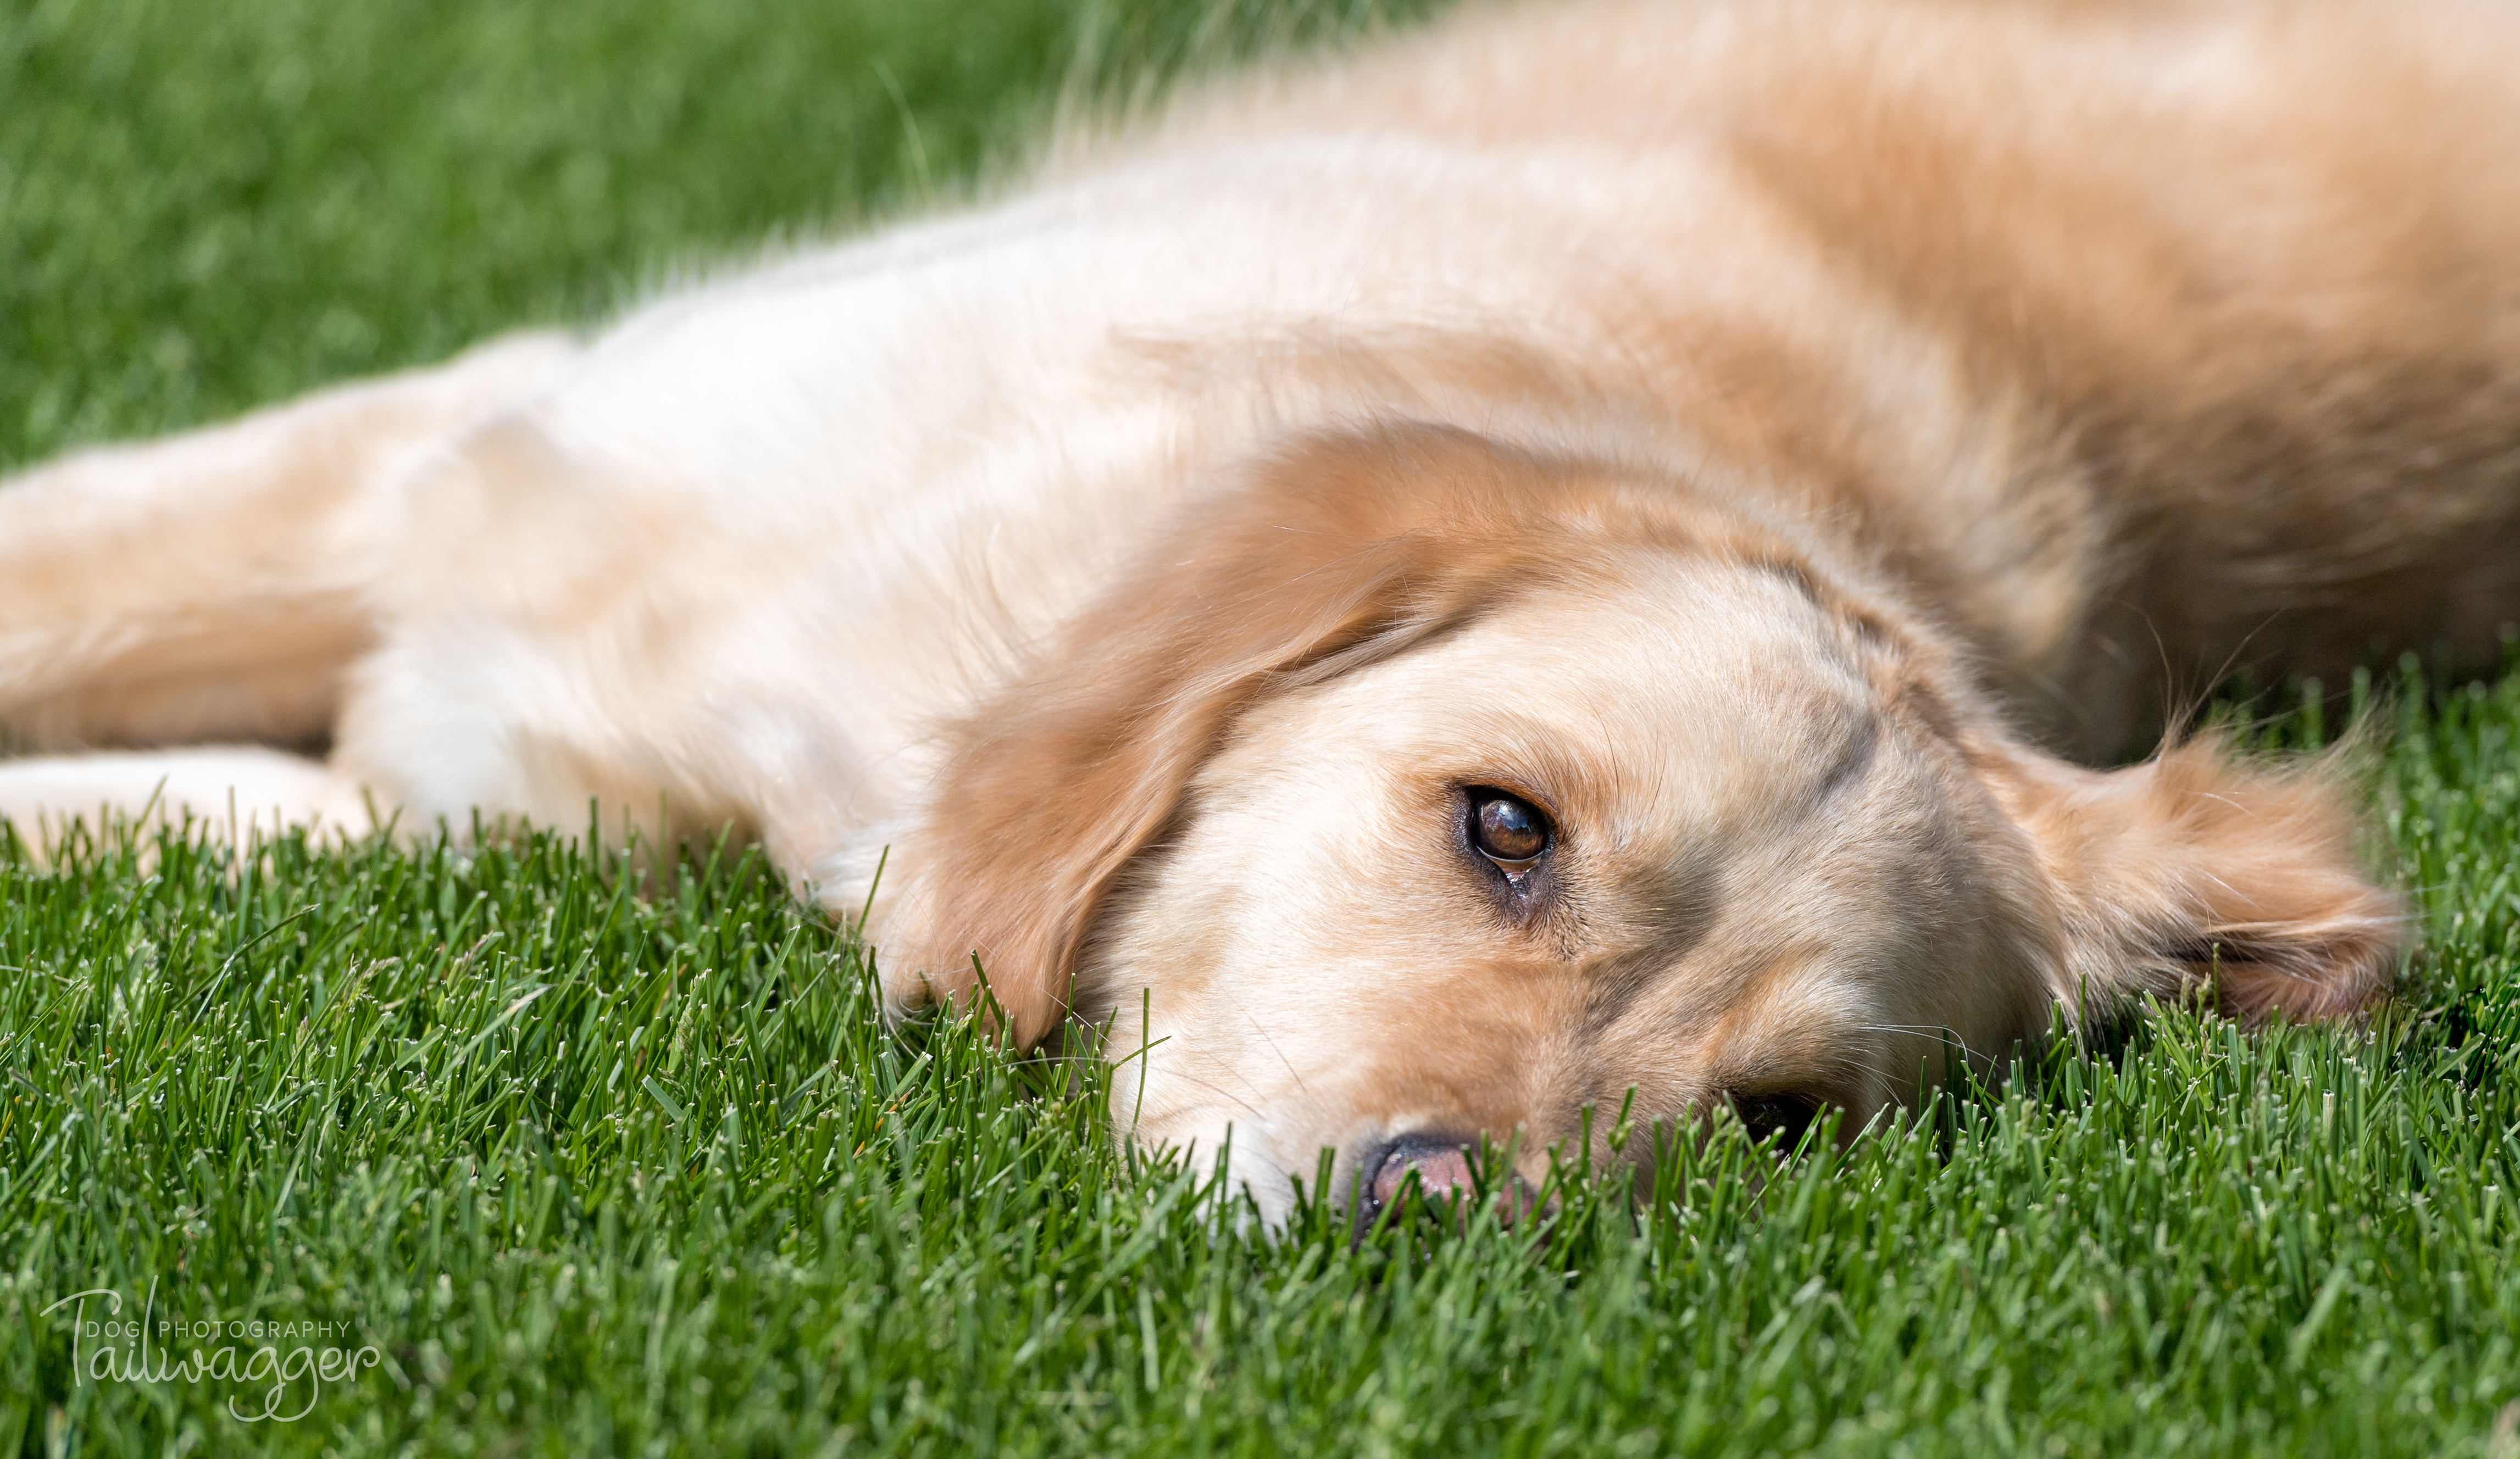 Female Golden Retriever napping in the grass.